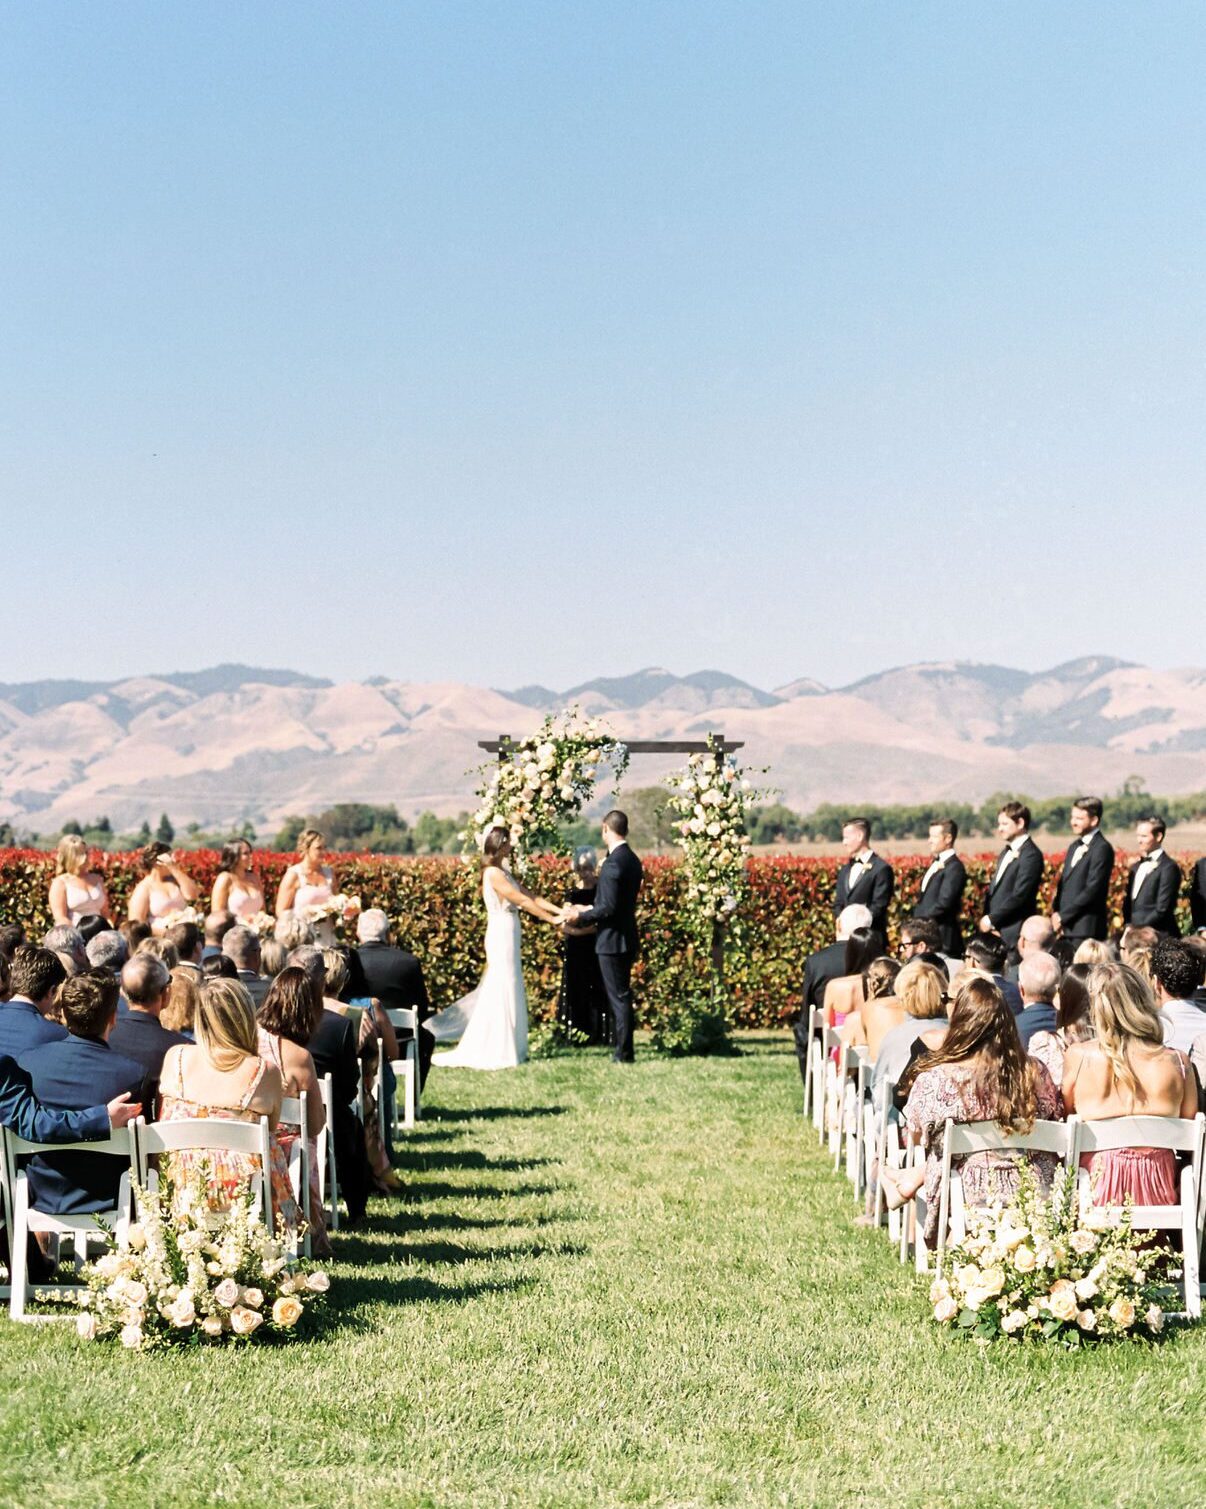 Best San Luis Obispo wedding venues The White Barn Edna Valley ceremony site with view of rolling SLO hills